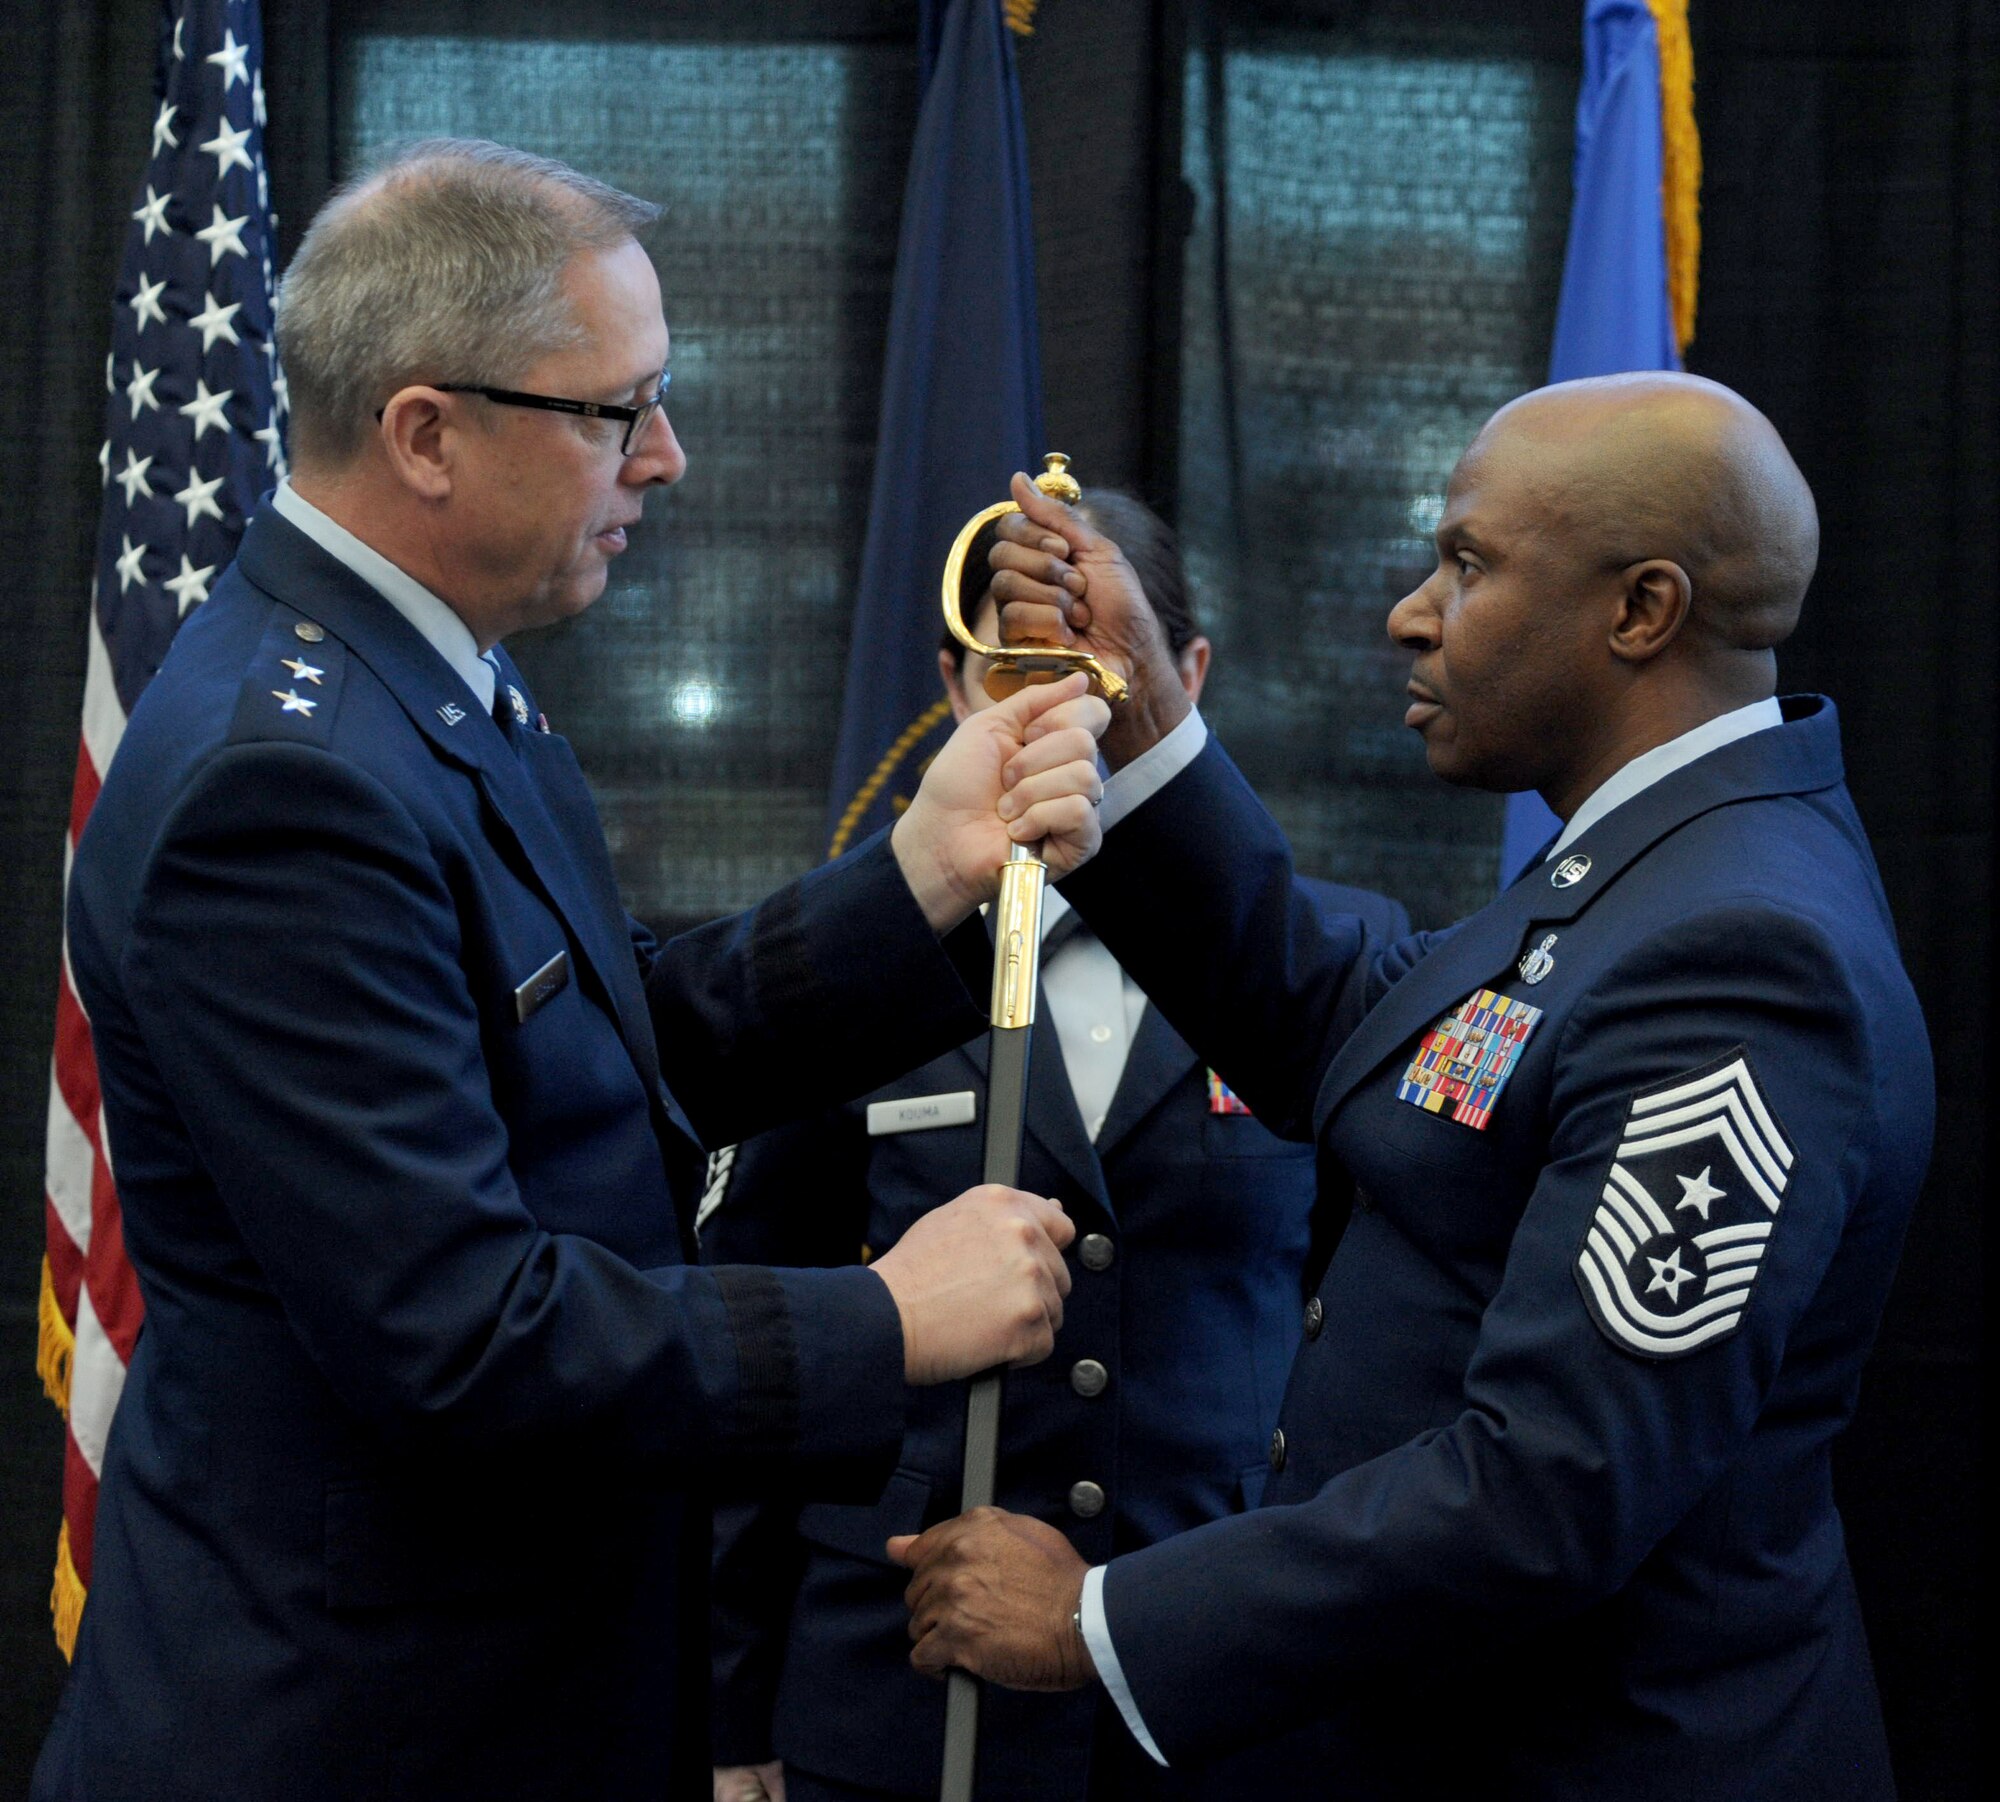 Chief Master Sgt. Tyrone Bingham receives a sword, symbolizing the transfer of responsibility from the outgoing senior enlisted leader to the incoming, from Maj. Gen. Daryl Bohac, Nebraska adjutant general during a formal ceremony held Dec. 2, 2016 at the Nebraska Joint Force Headquarters in Lincoln, Nebraska.